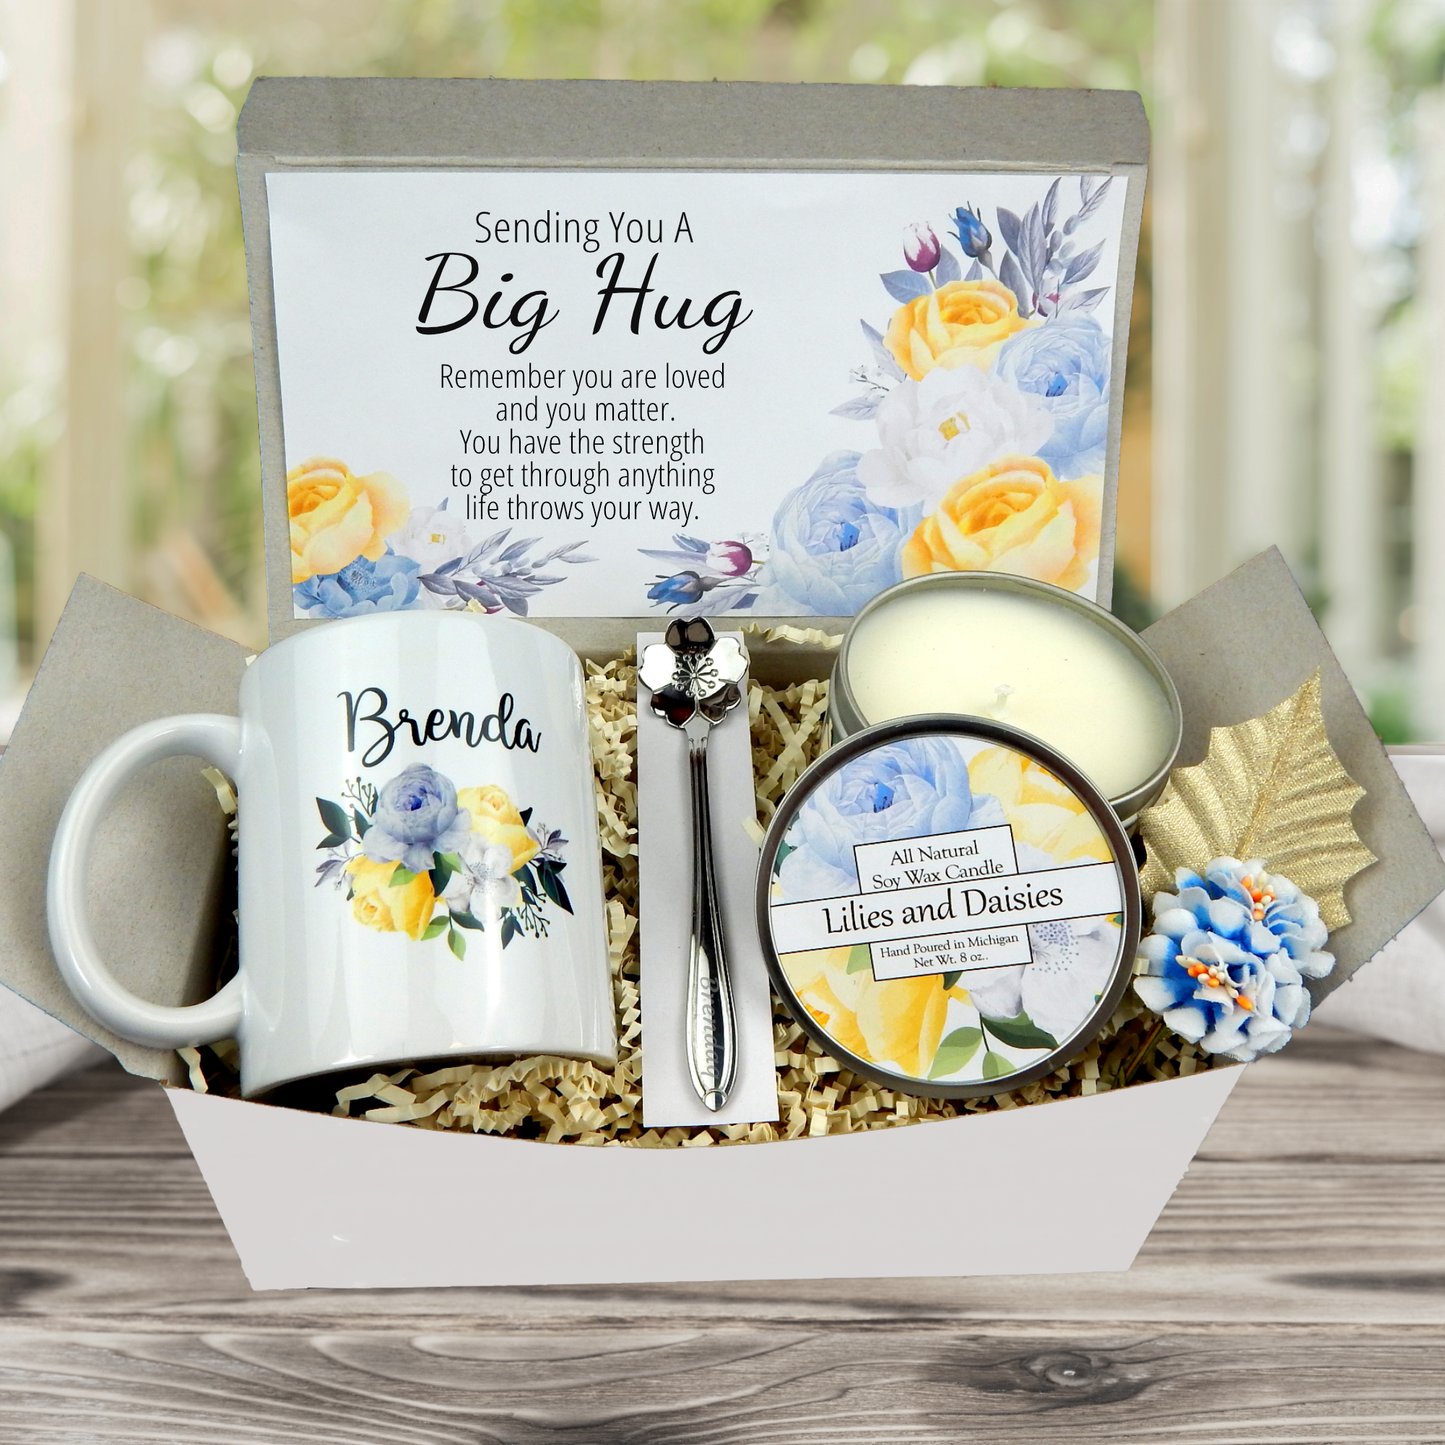 Hug In A Box Encouragement Gift - Thinking Of You Care Package - Self Care Basket